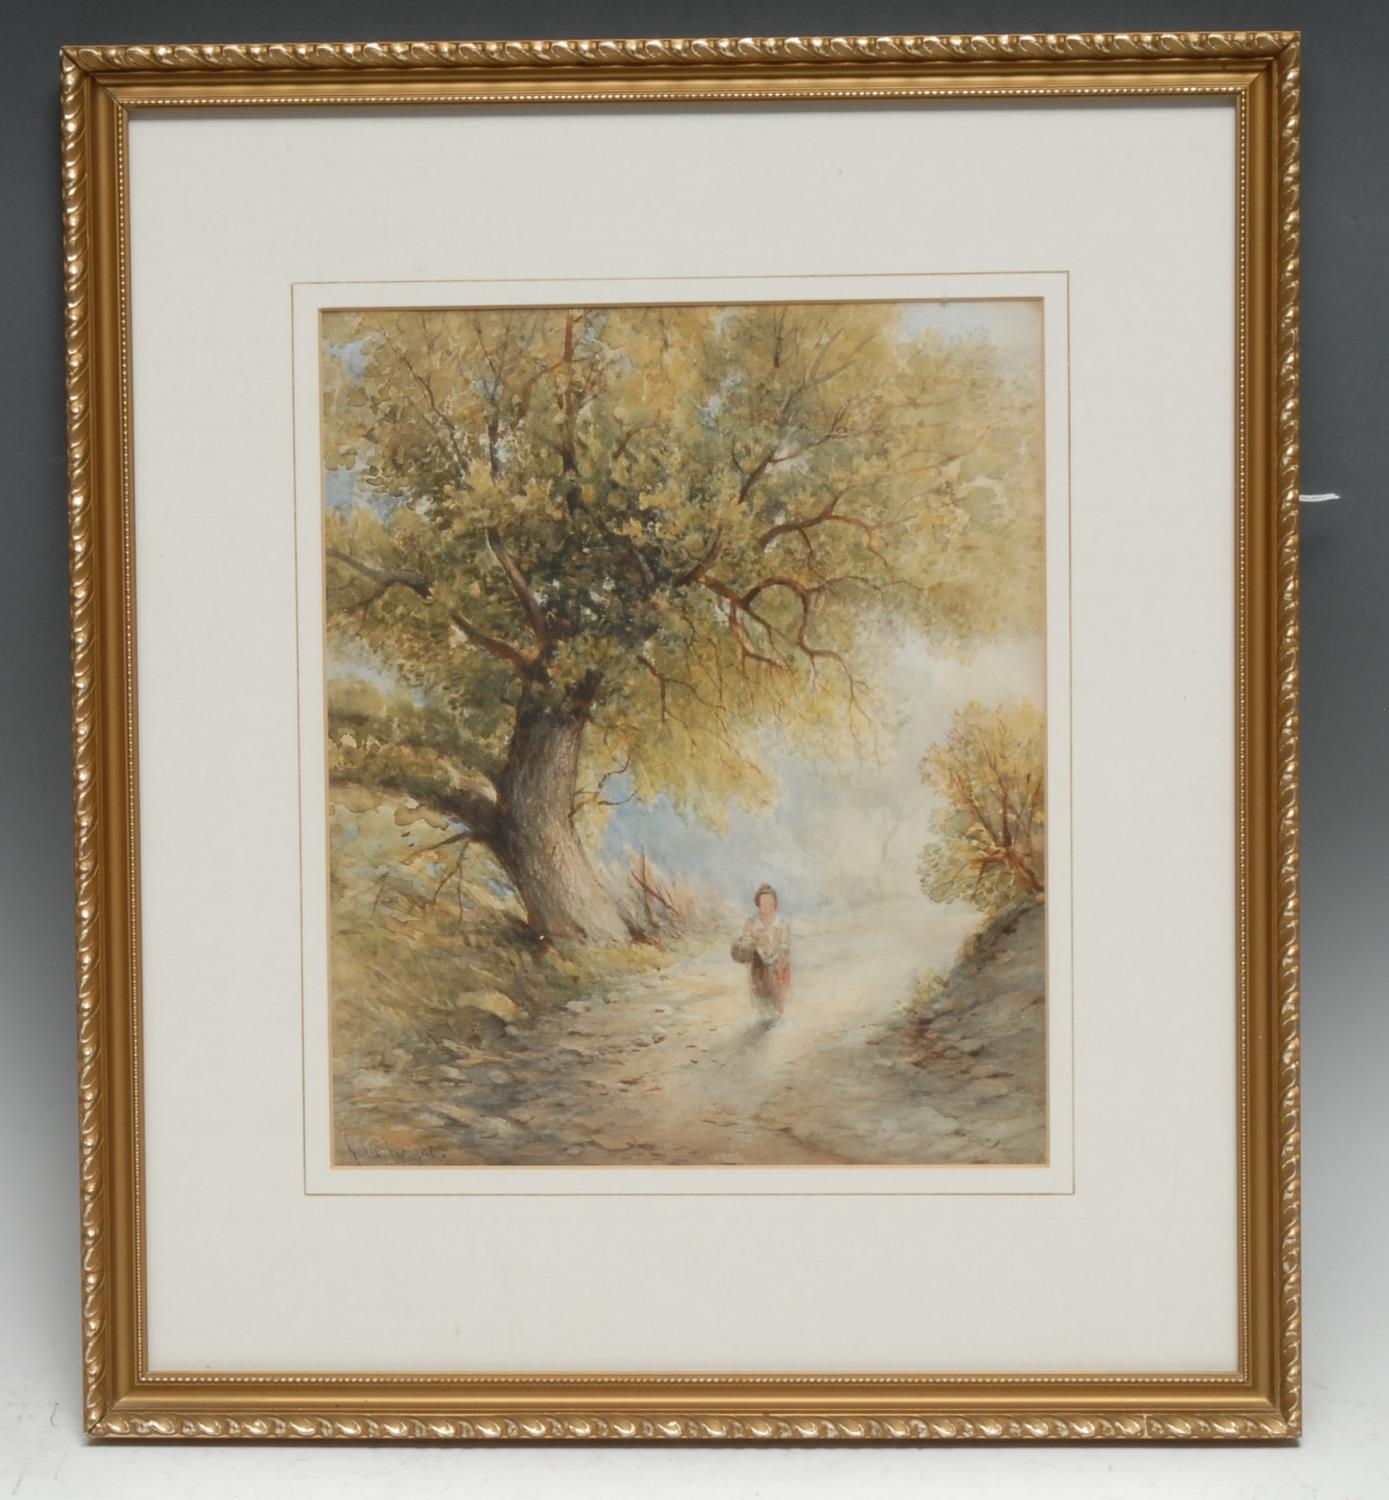 John Wright (19th century) Quiet Walking Home signed, watercolour, 26cm x 21cm - Image 2 of 4